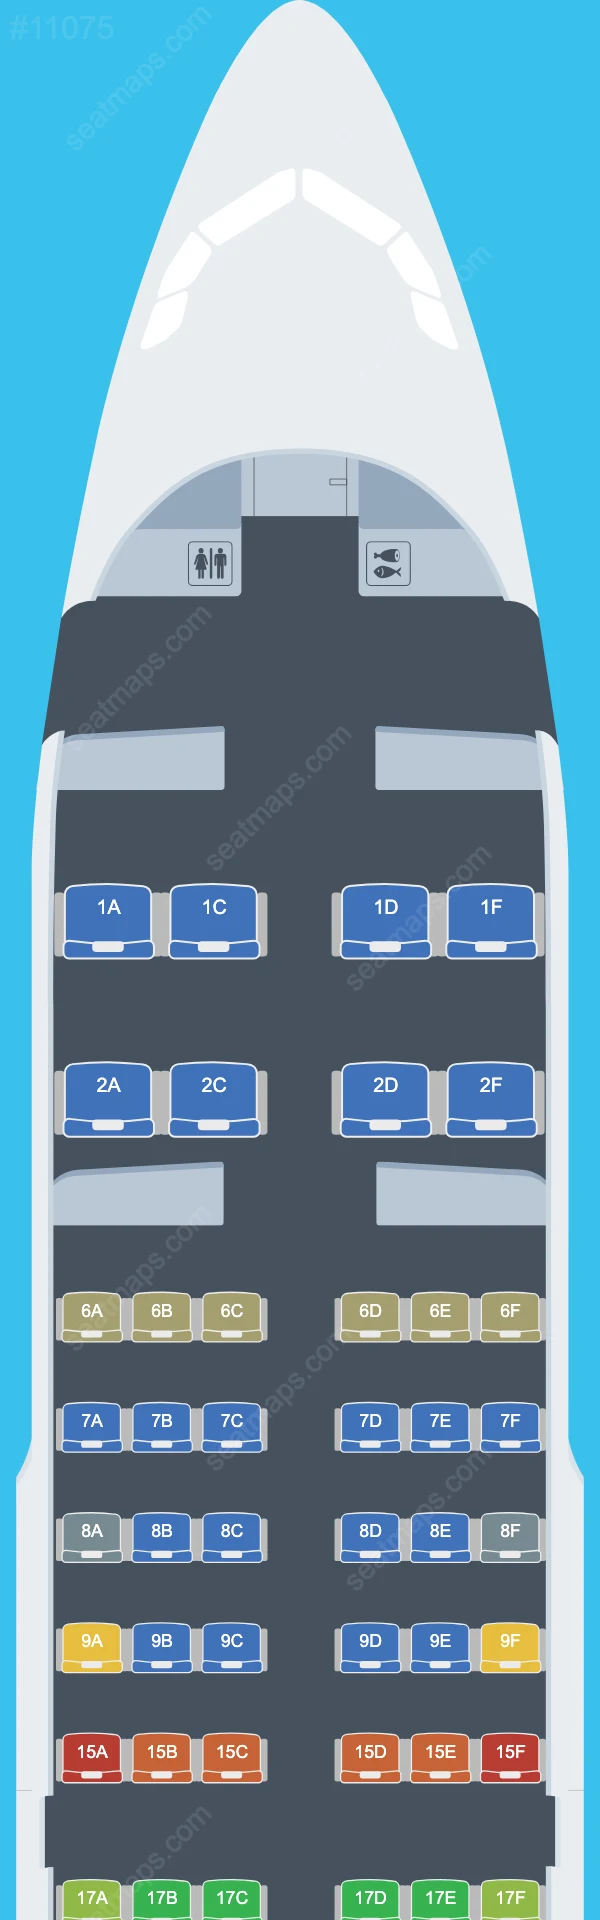 Alaska Airlines Airbus A319 Seat Maps A319-100 V.1